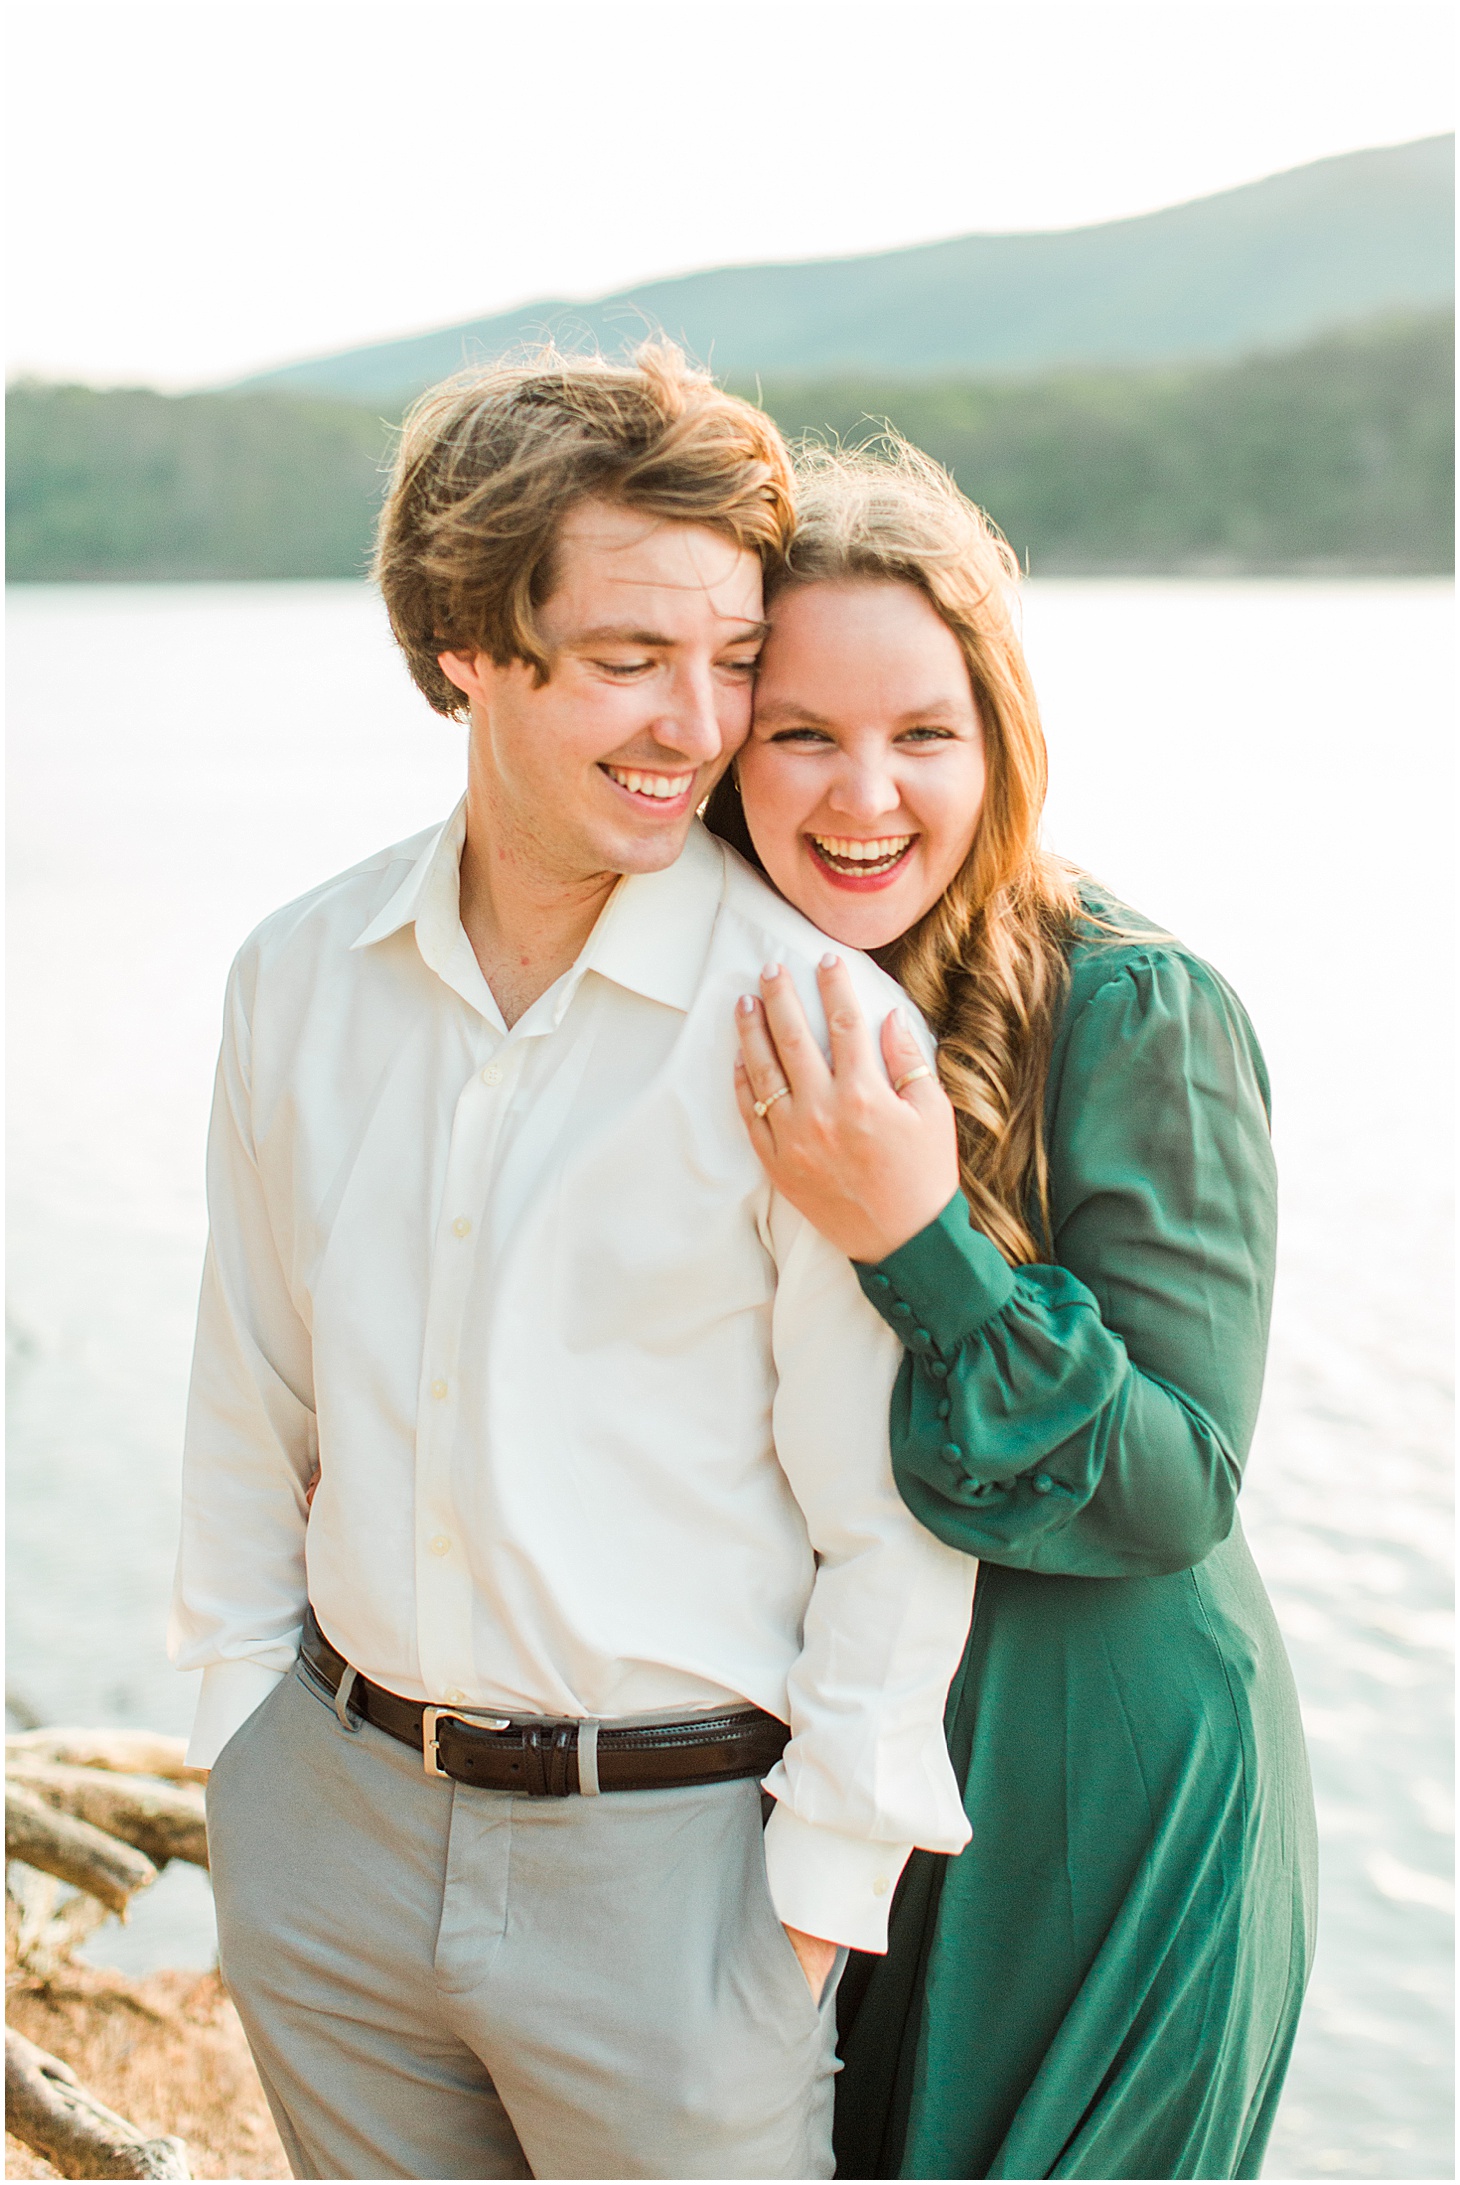 carvinscoveengagementsession_roanokeengagementsession_carvinscove_virginiawedding_virginiaweddingphotographer_vaweddingphotographer_photo_0046.jpg